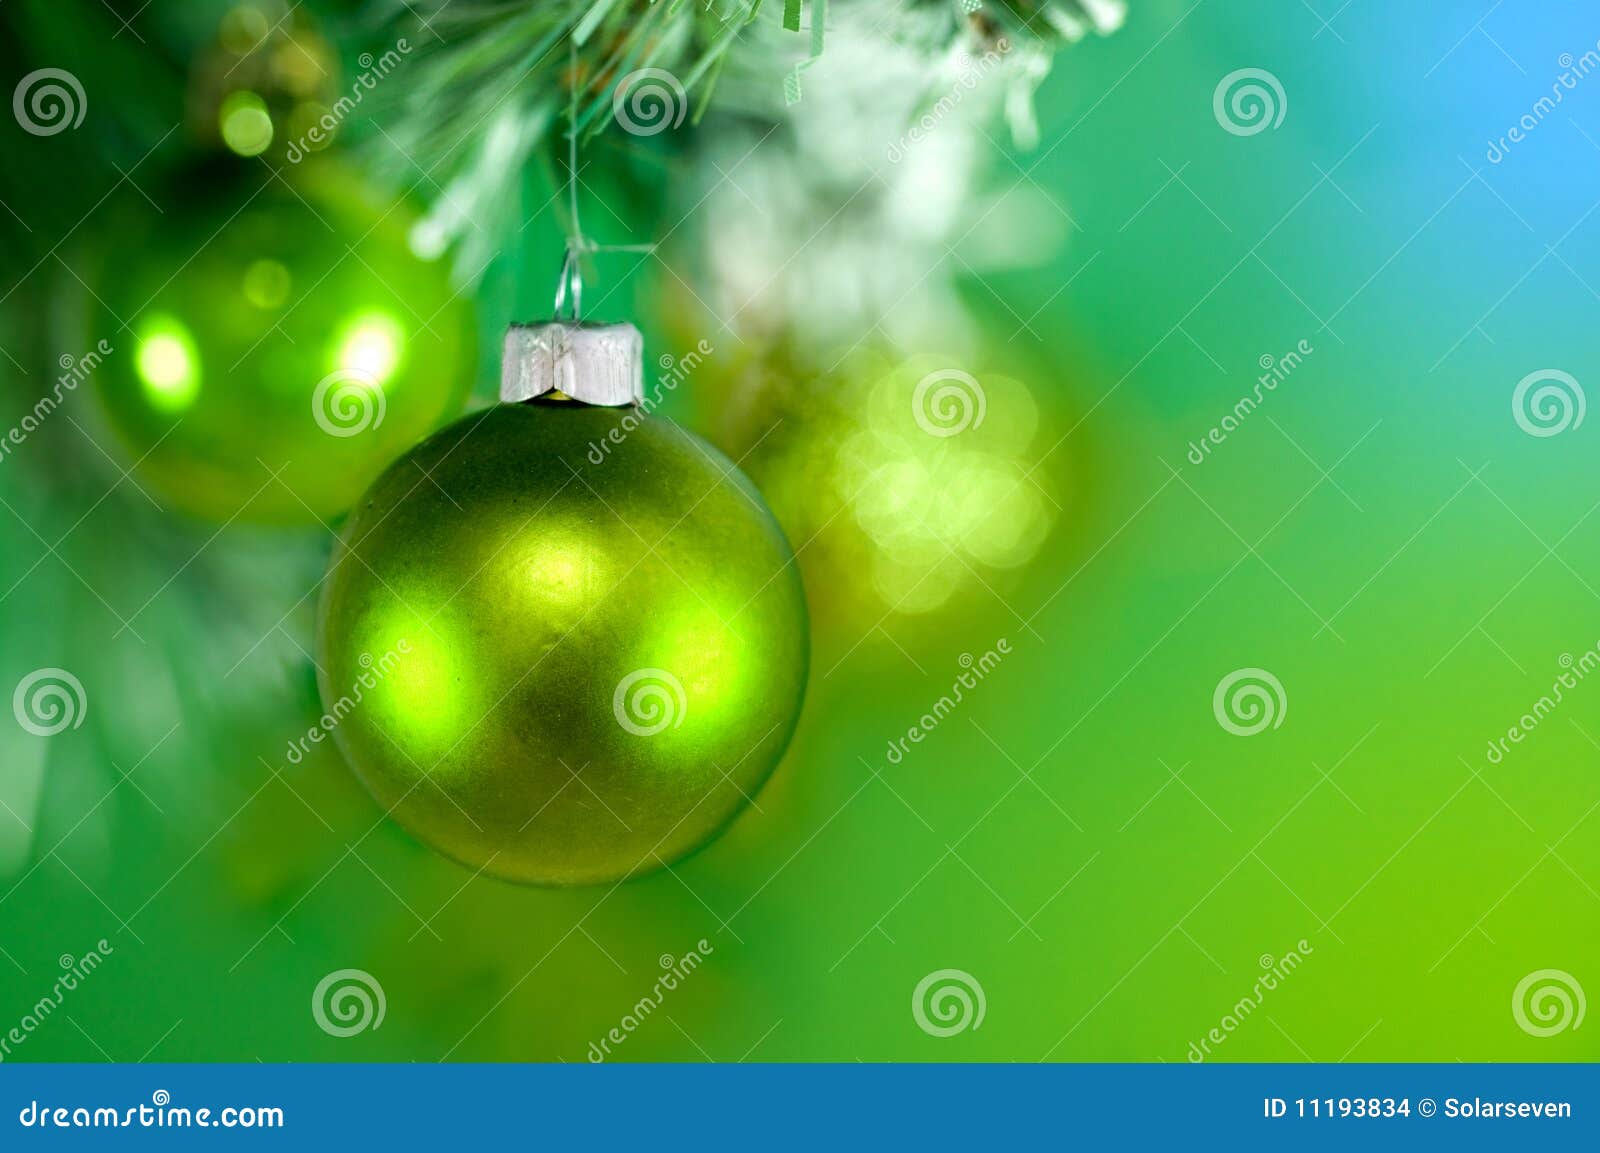 Green Christmas Baubles stock photo. Image of tree, hanging - 11193834